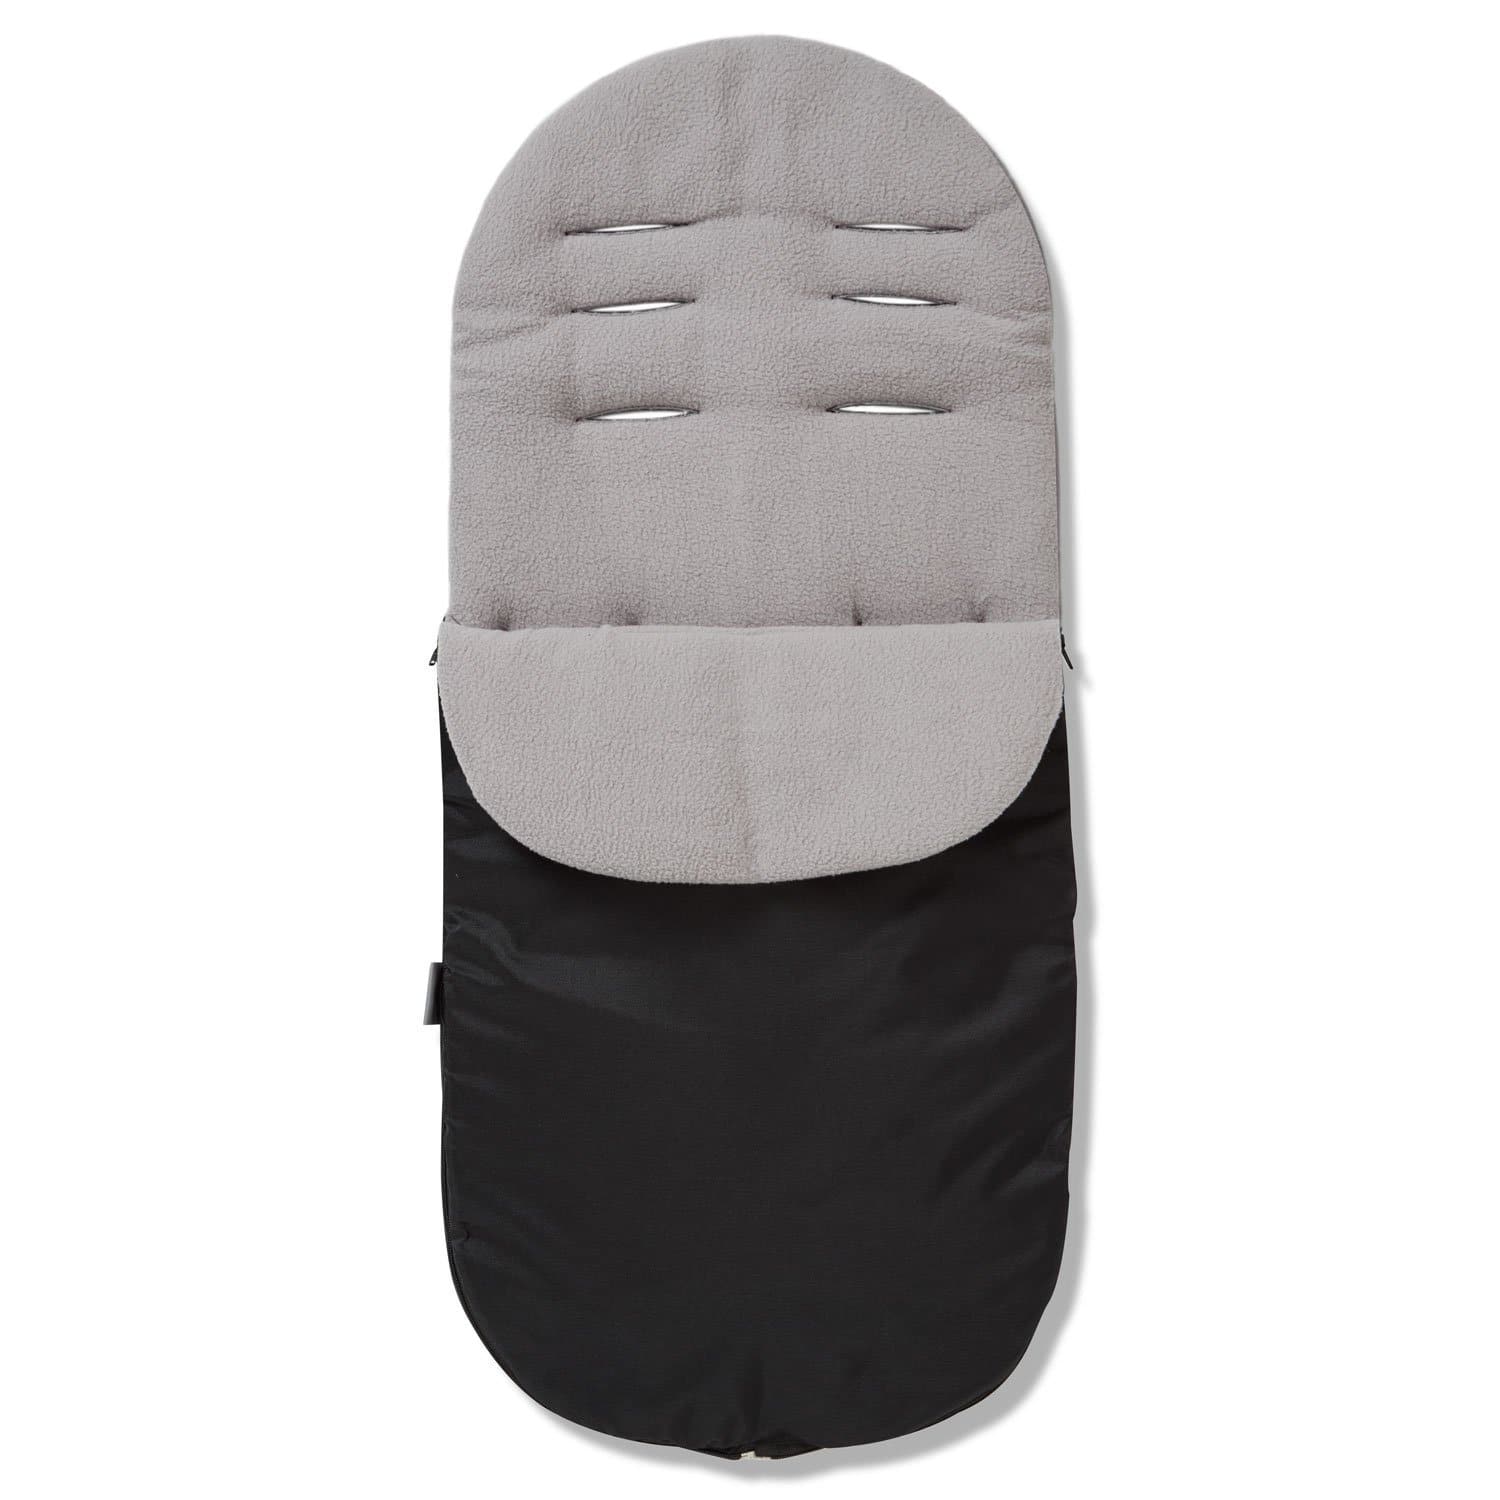 Footmuff / Cosy Toes Compatible with Mee-Go - For Your Little One